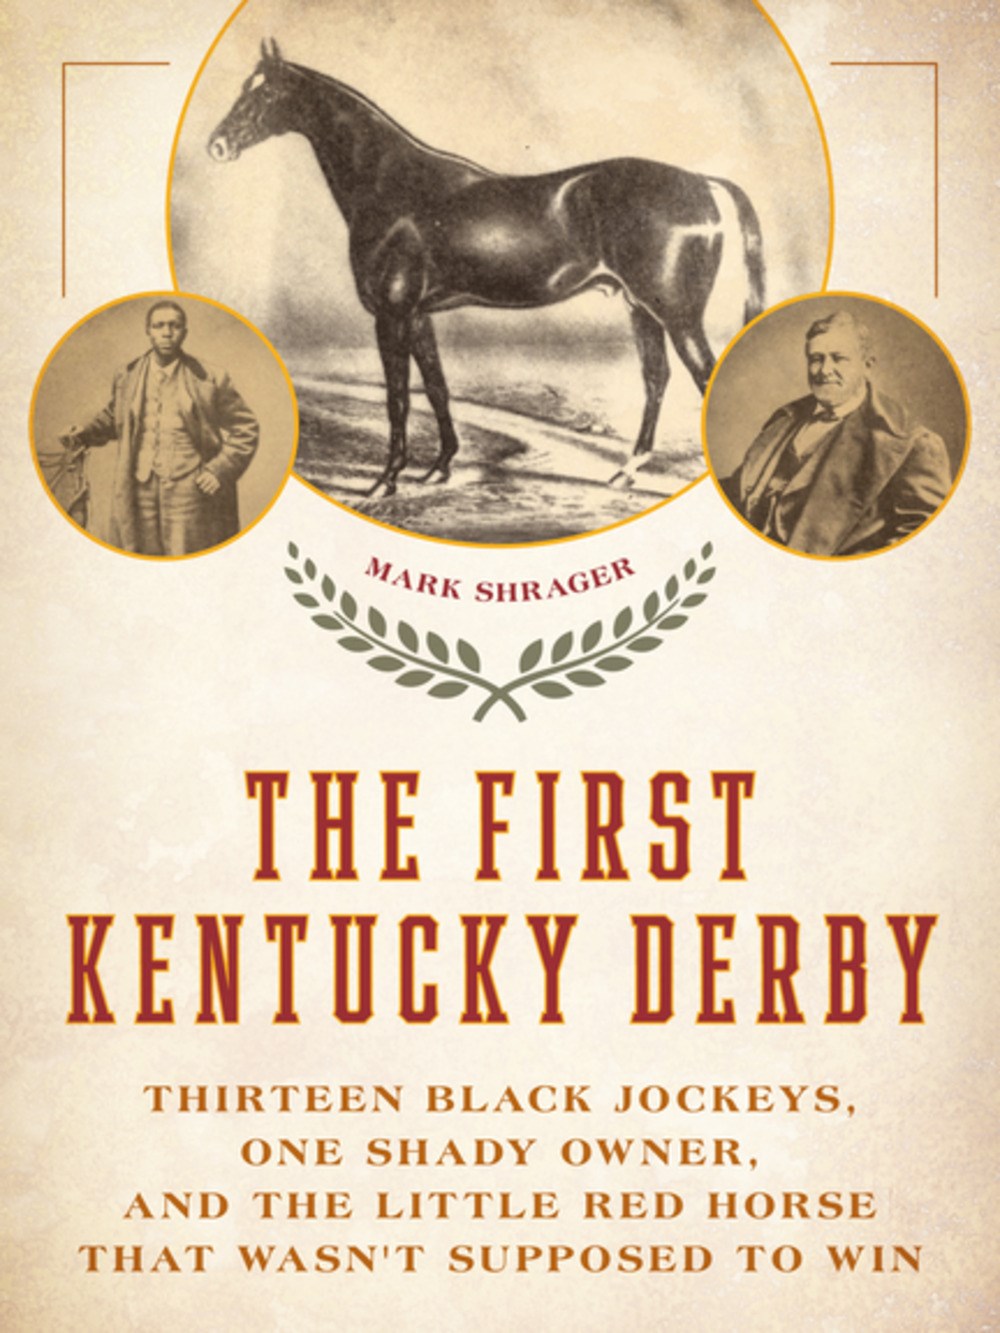 The First Kentucky Derby: Thirteen Black Jockeys, One Shady Owner, and the Little Red Horse That Wasn’t Supposed To Win